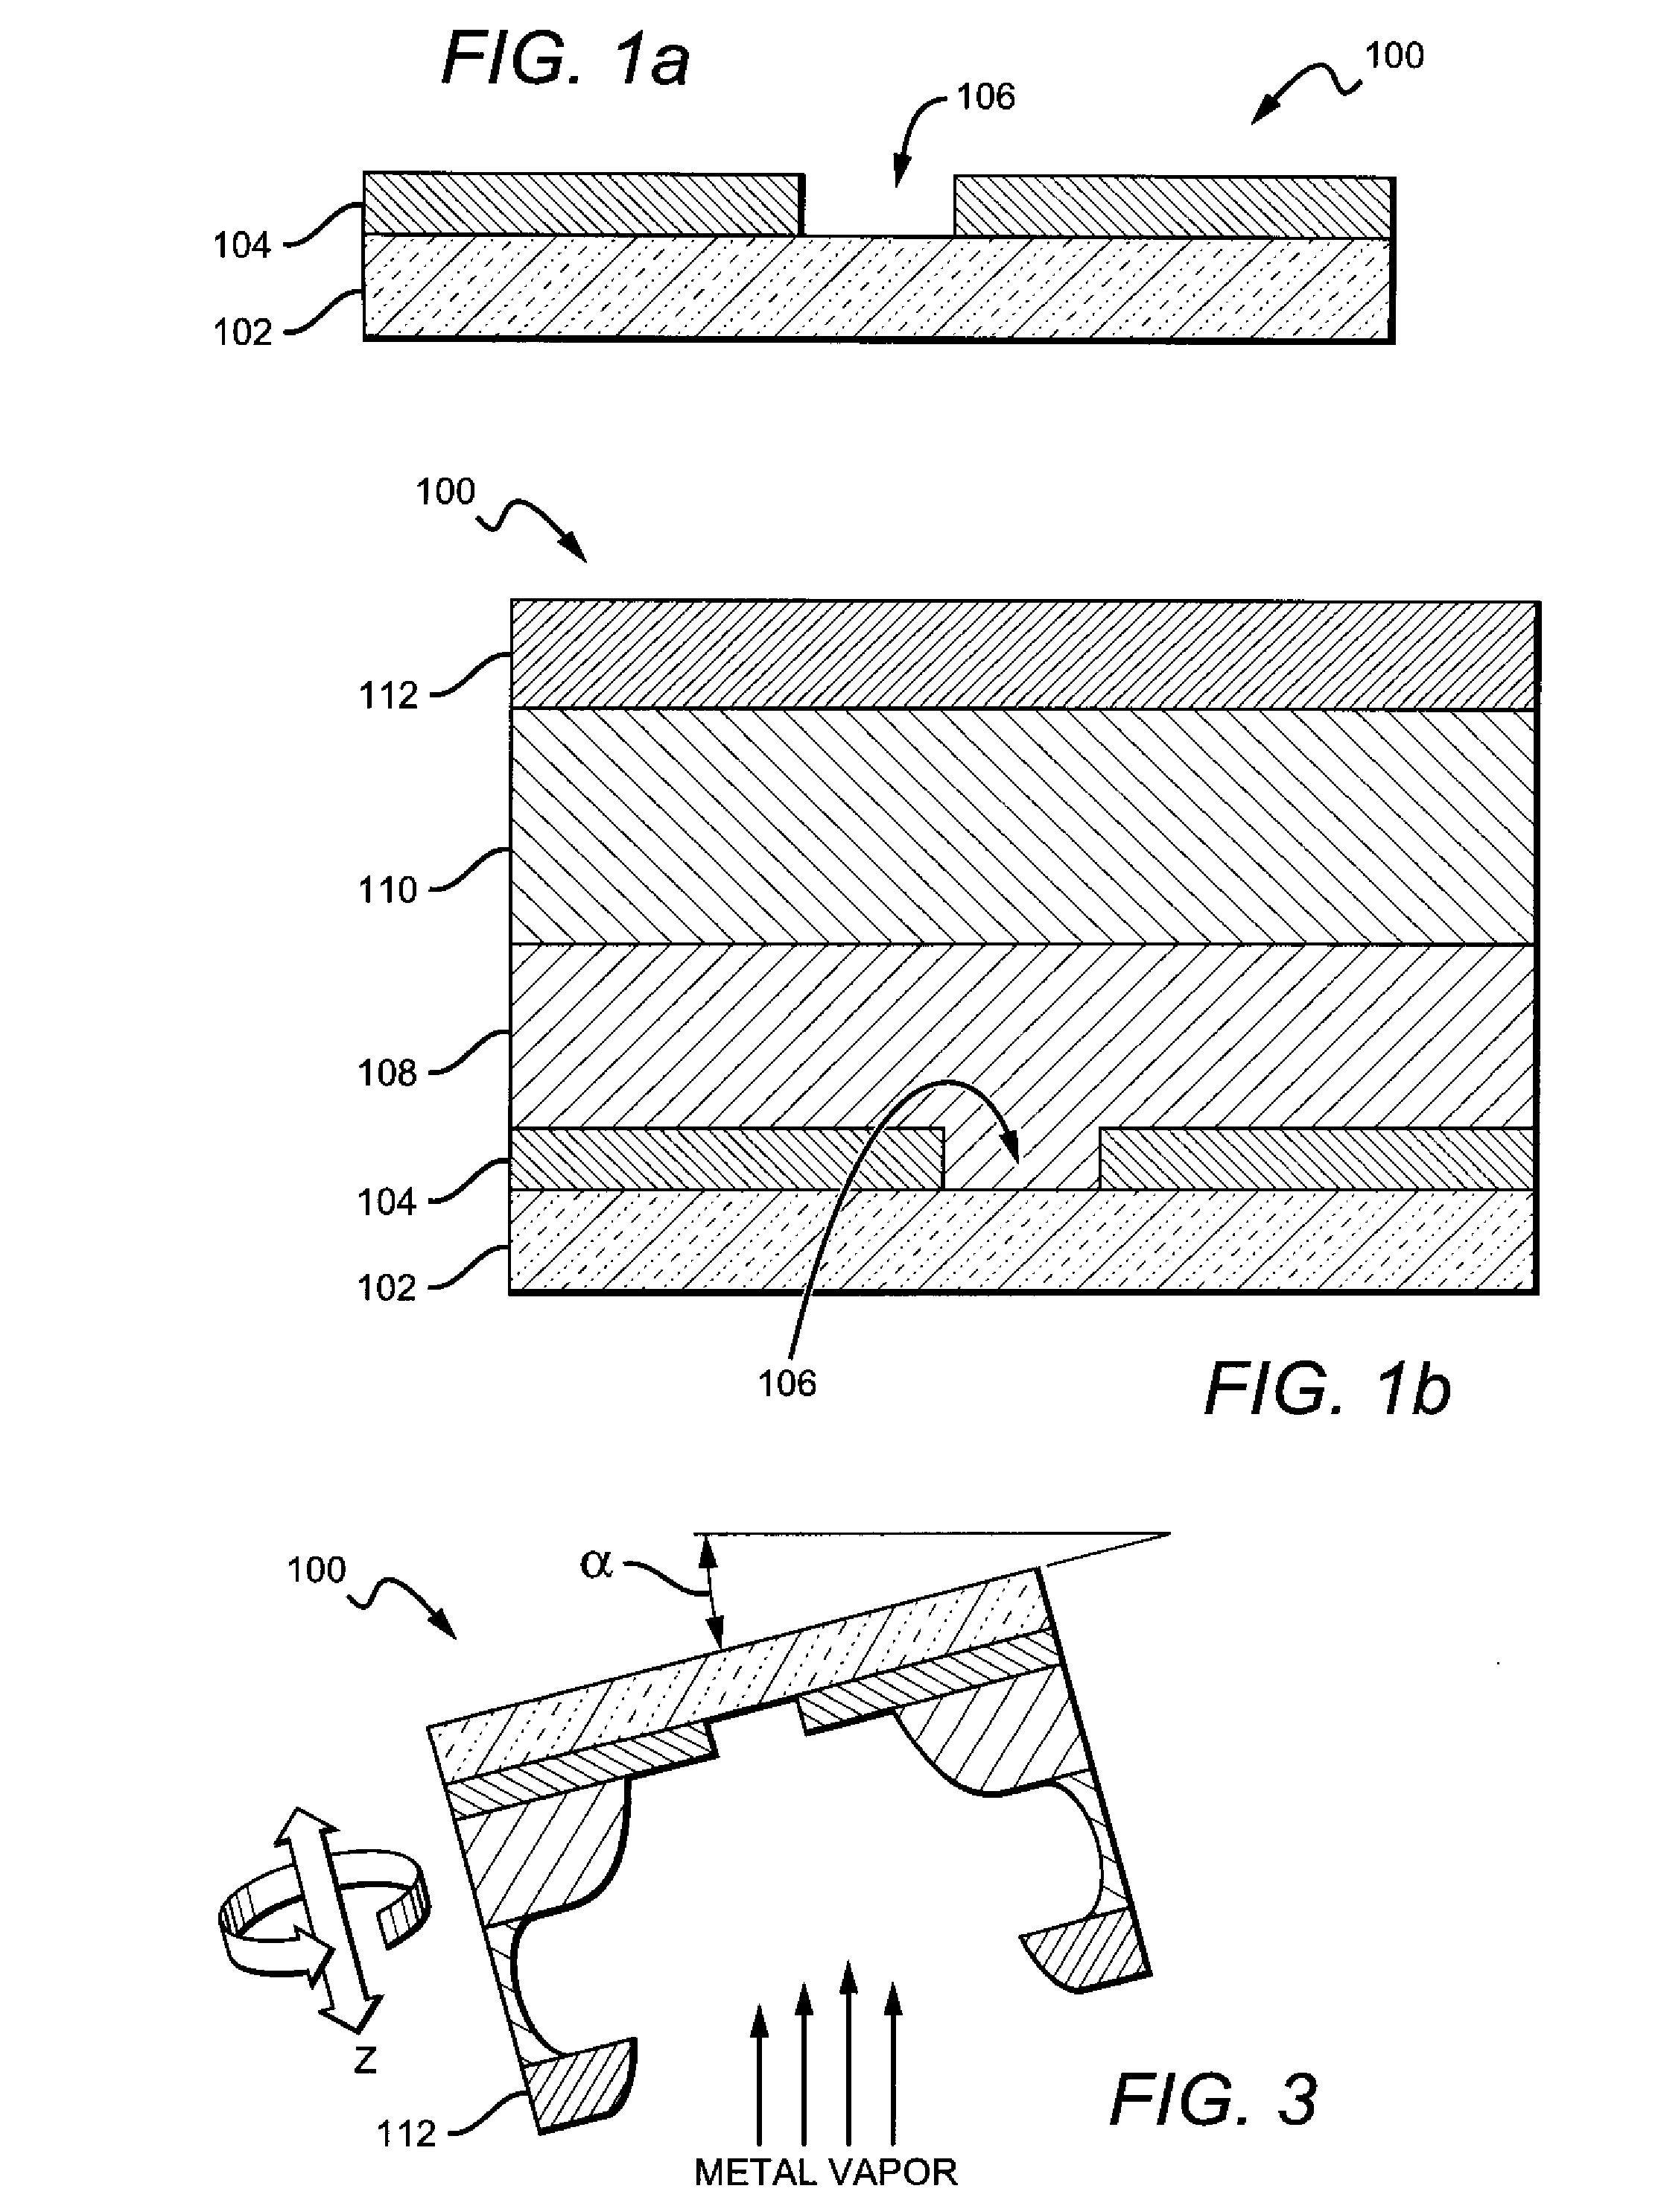 Gate electrodes for millimeter-wave operation and methods of fabrication